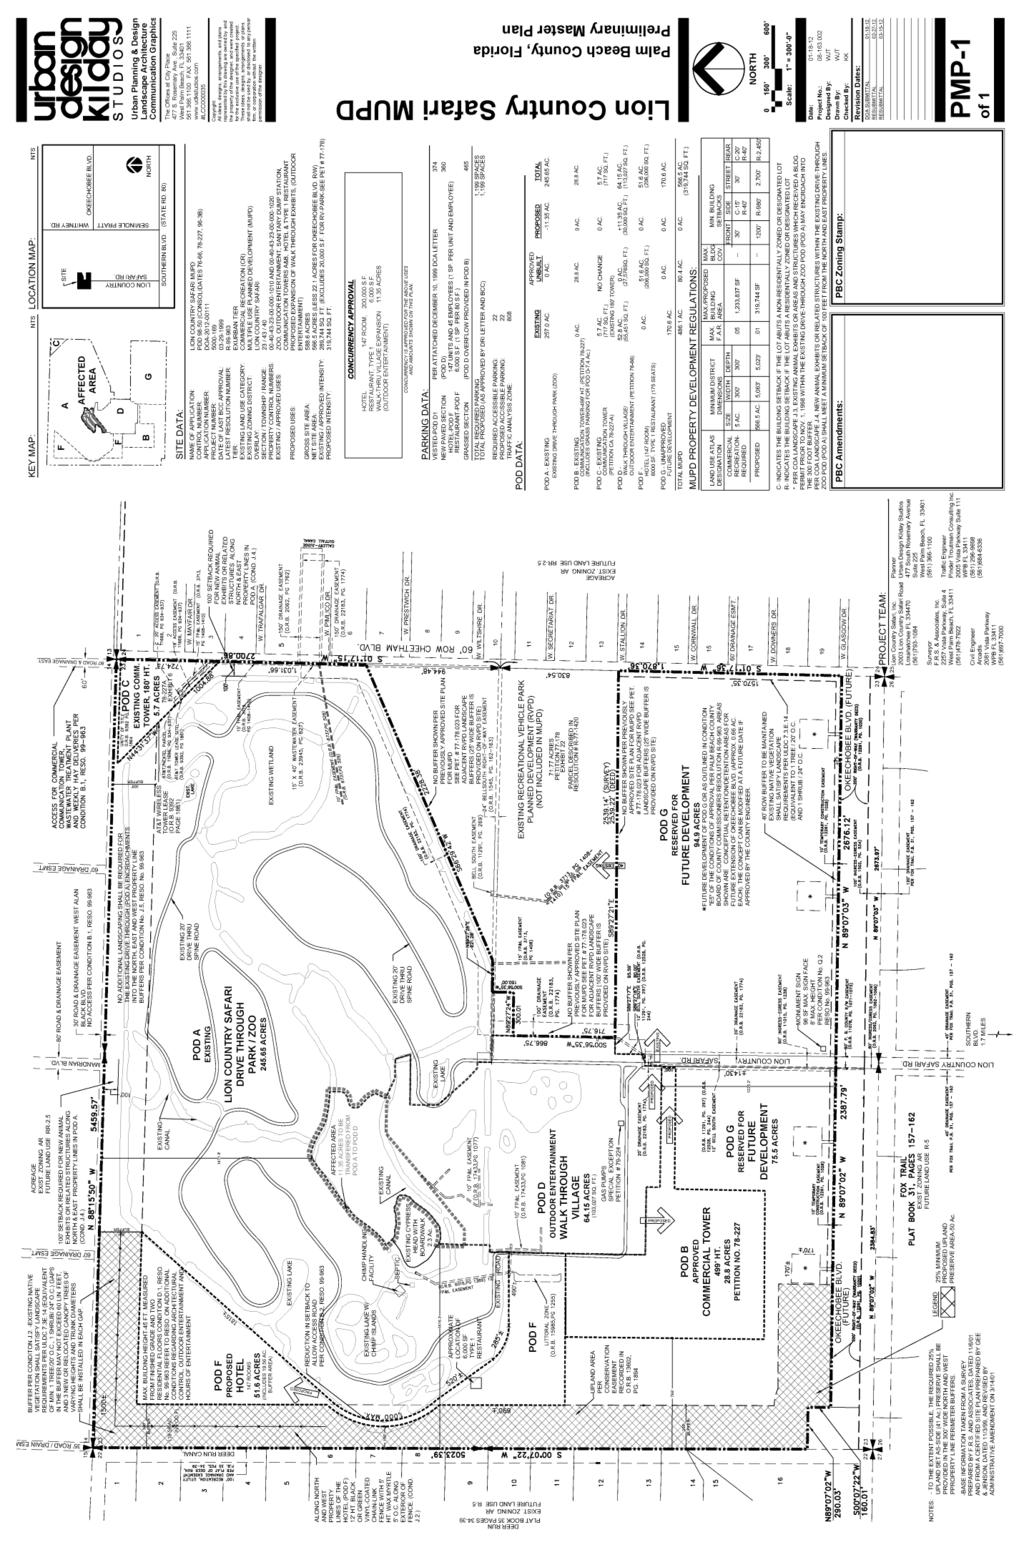 Figure 4 Preliminary Site Plan dated